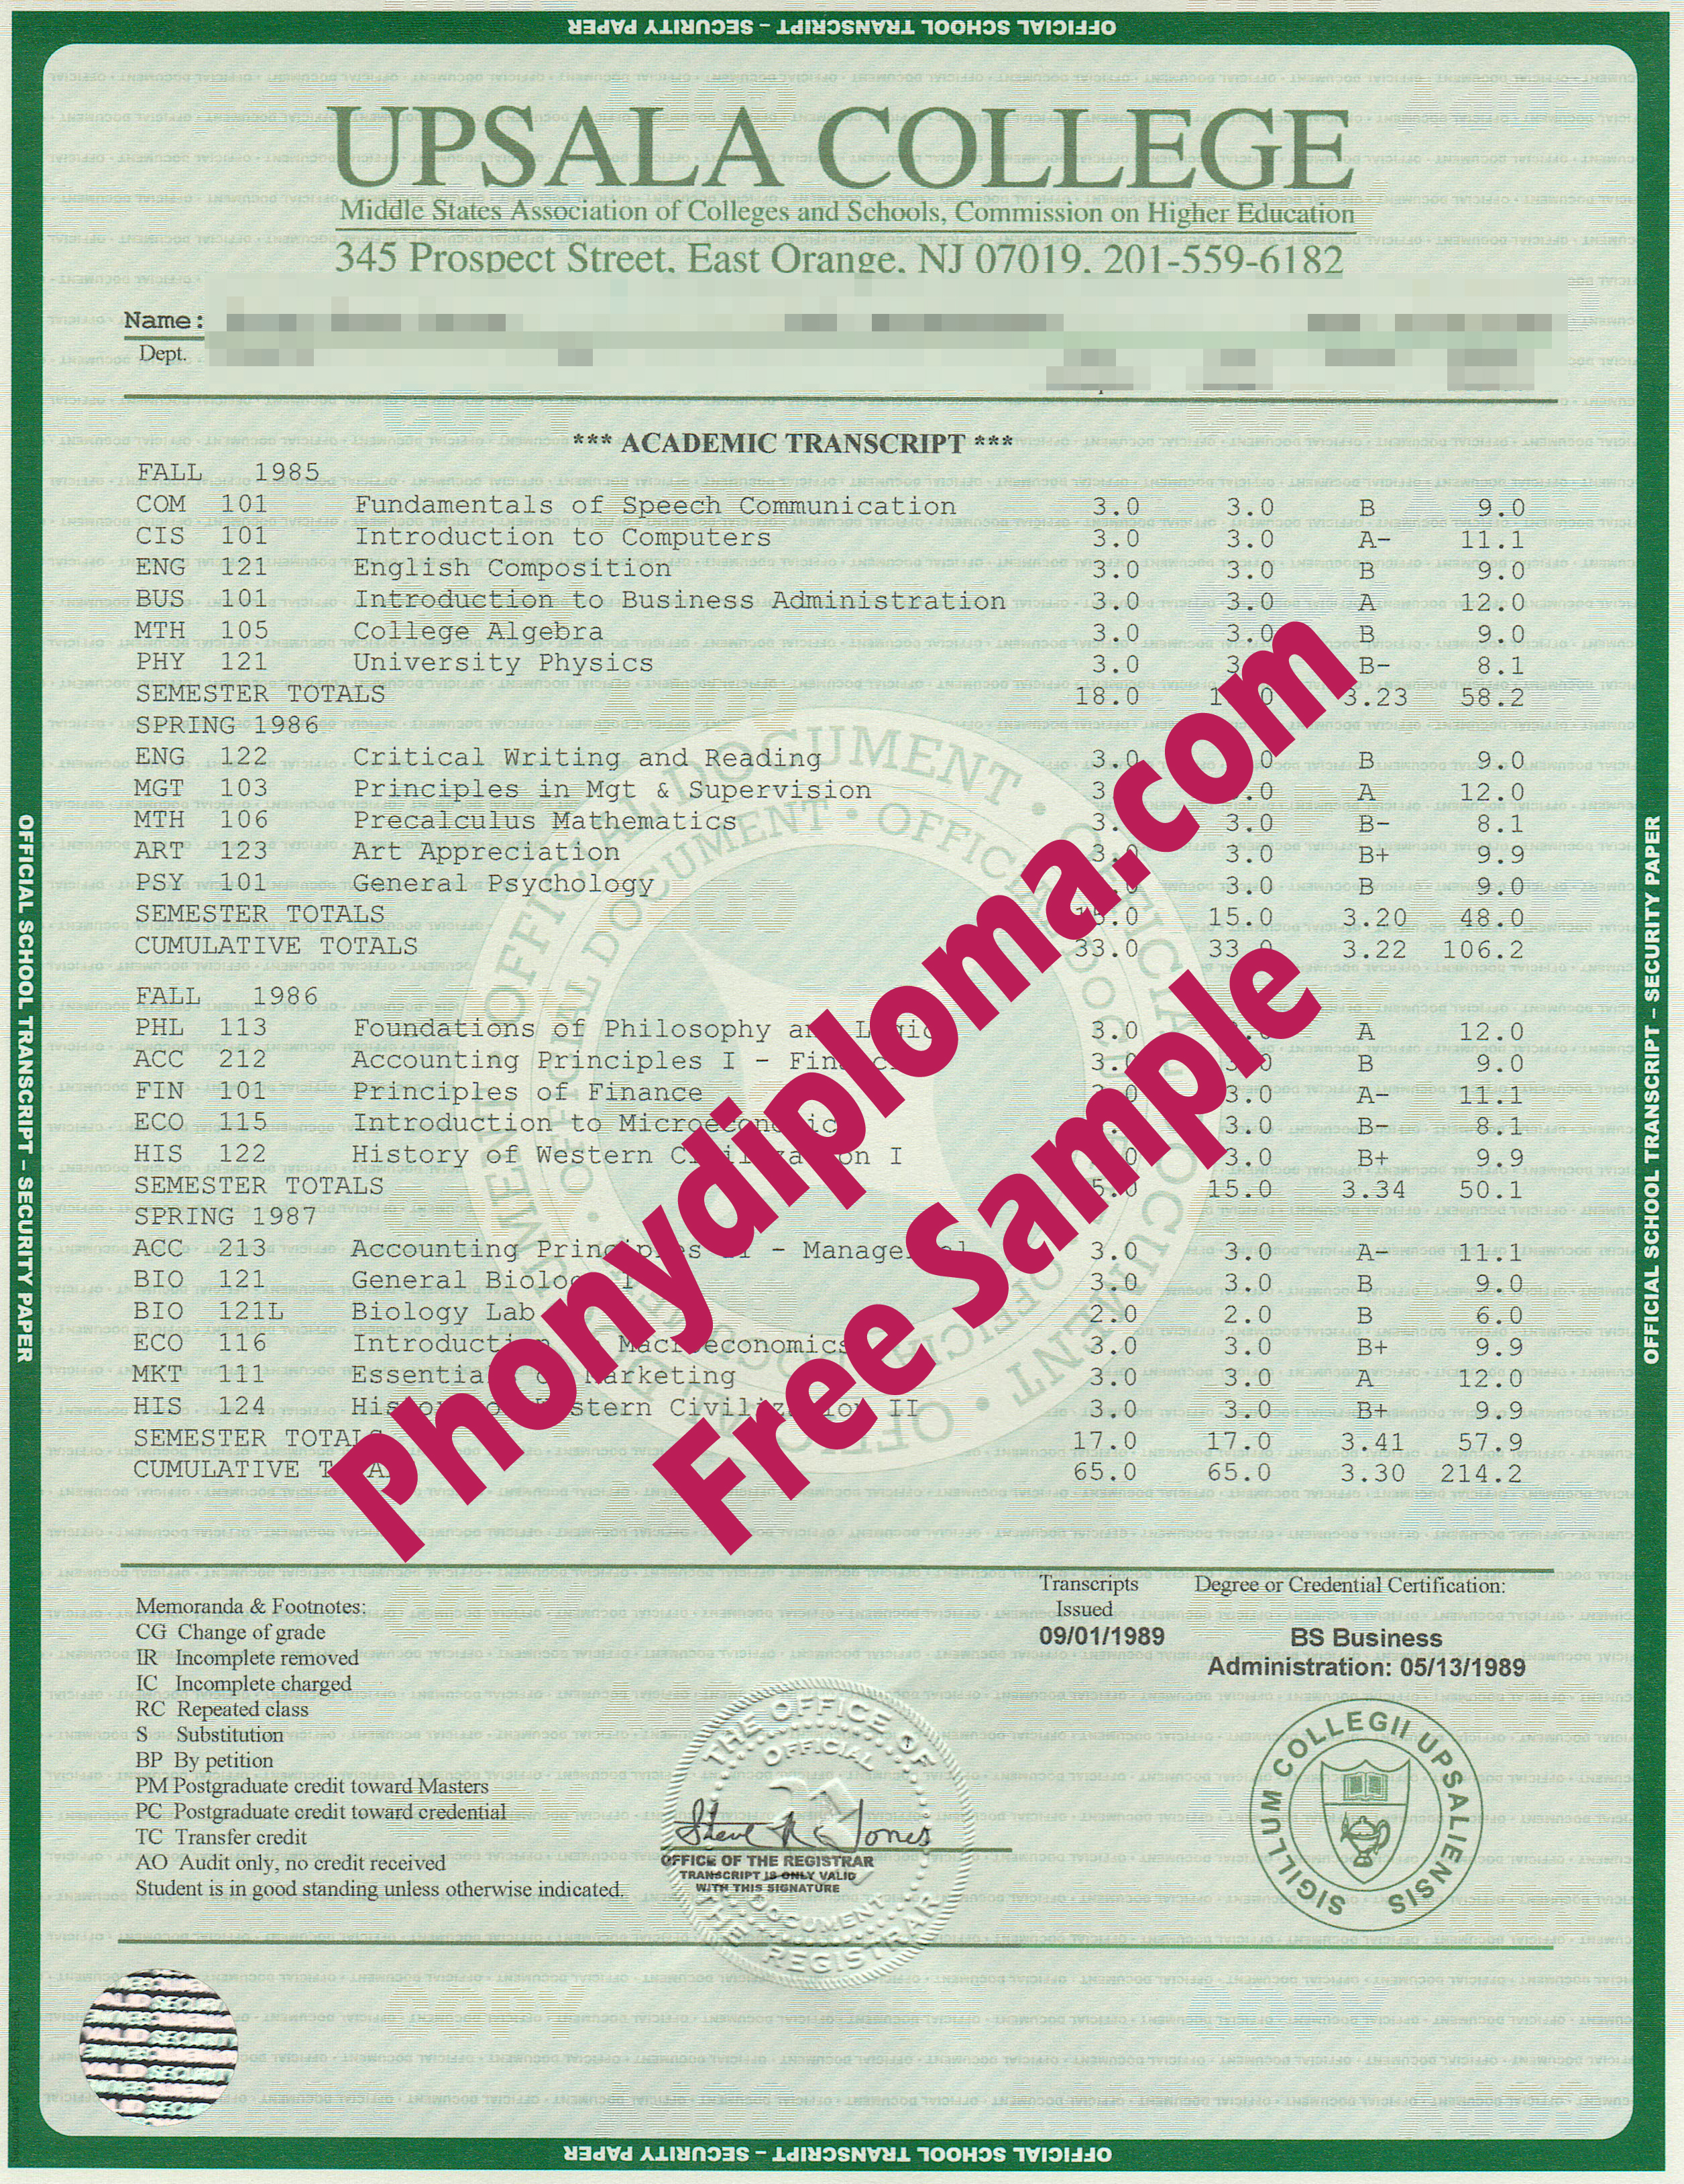 Upsala College House Design Transcripts Free Sample From Phonydiploma